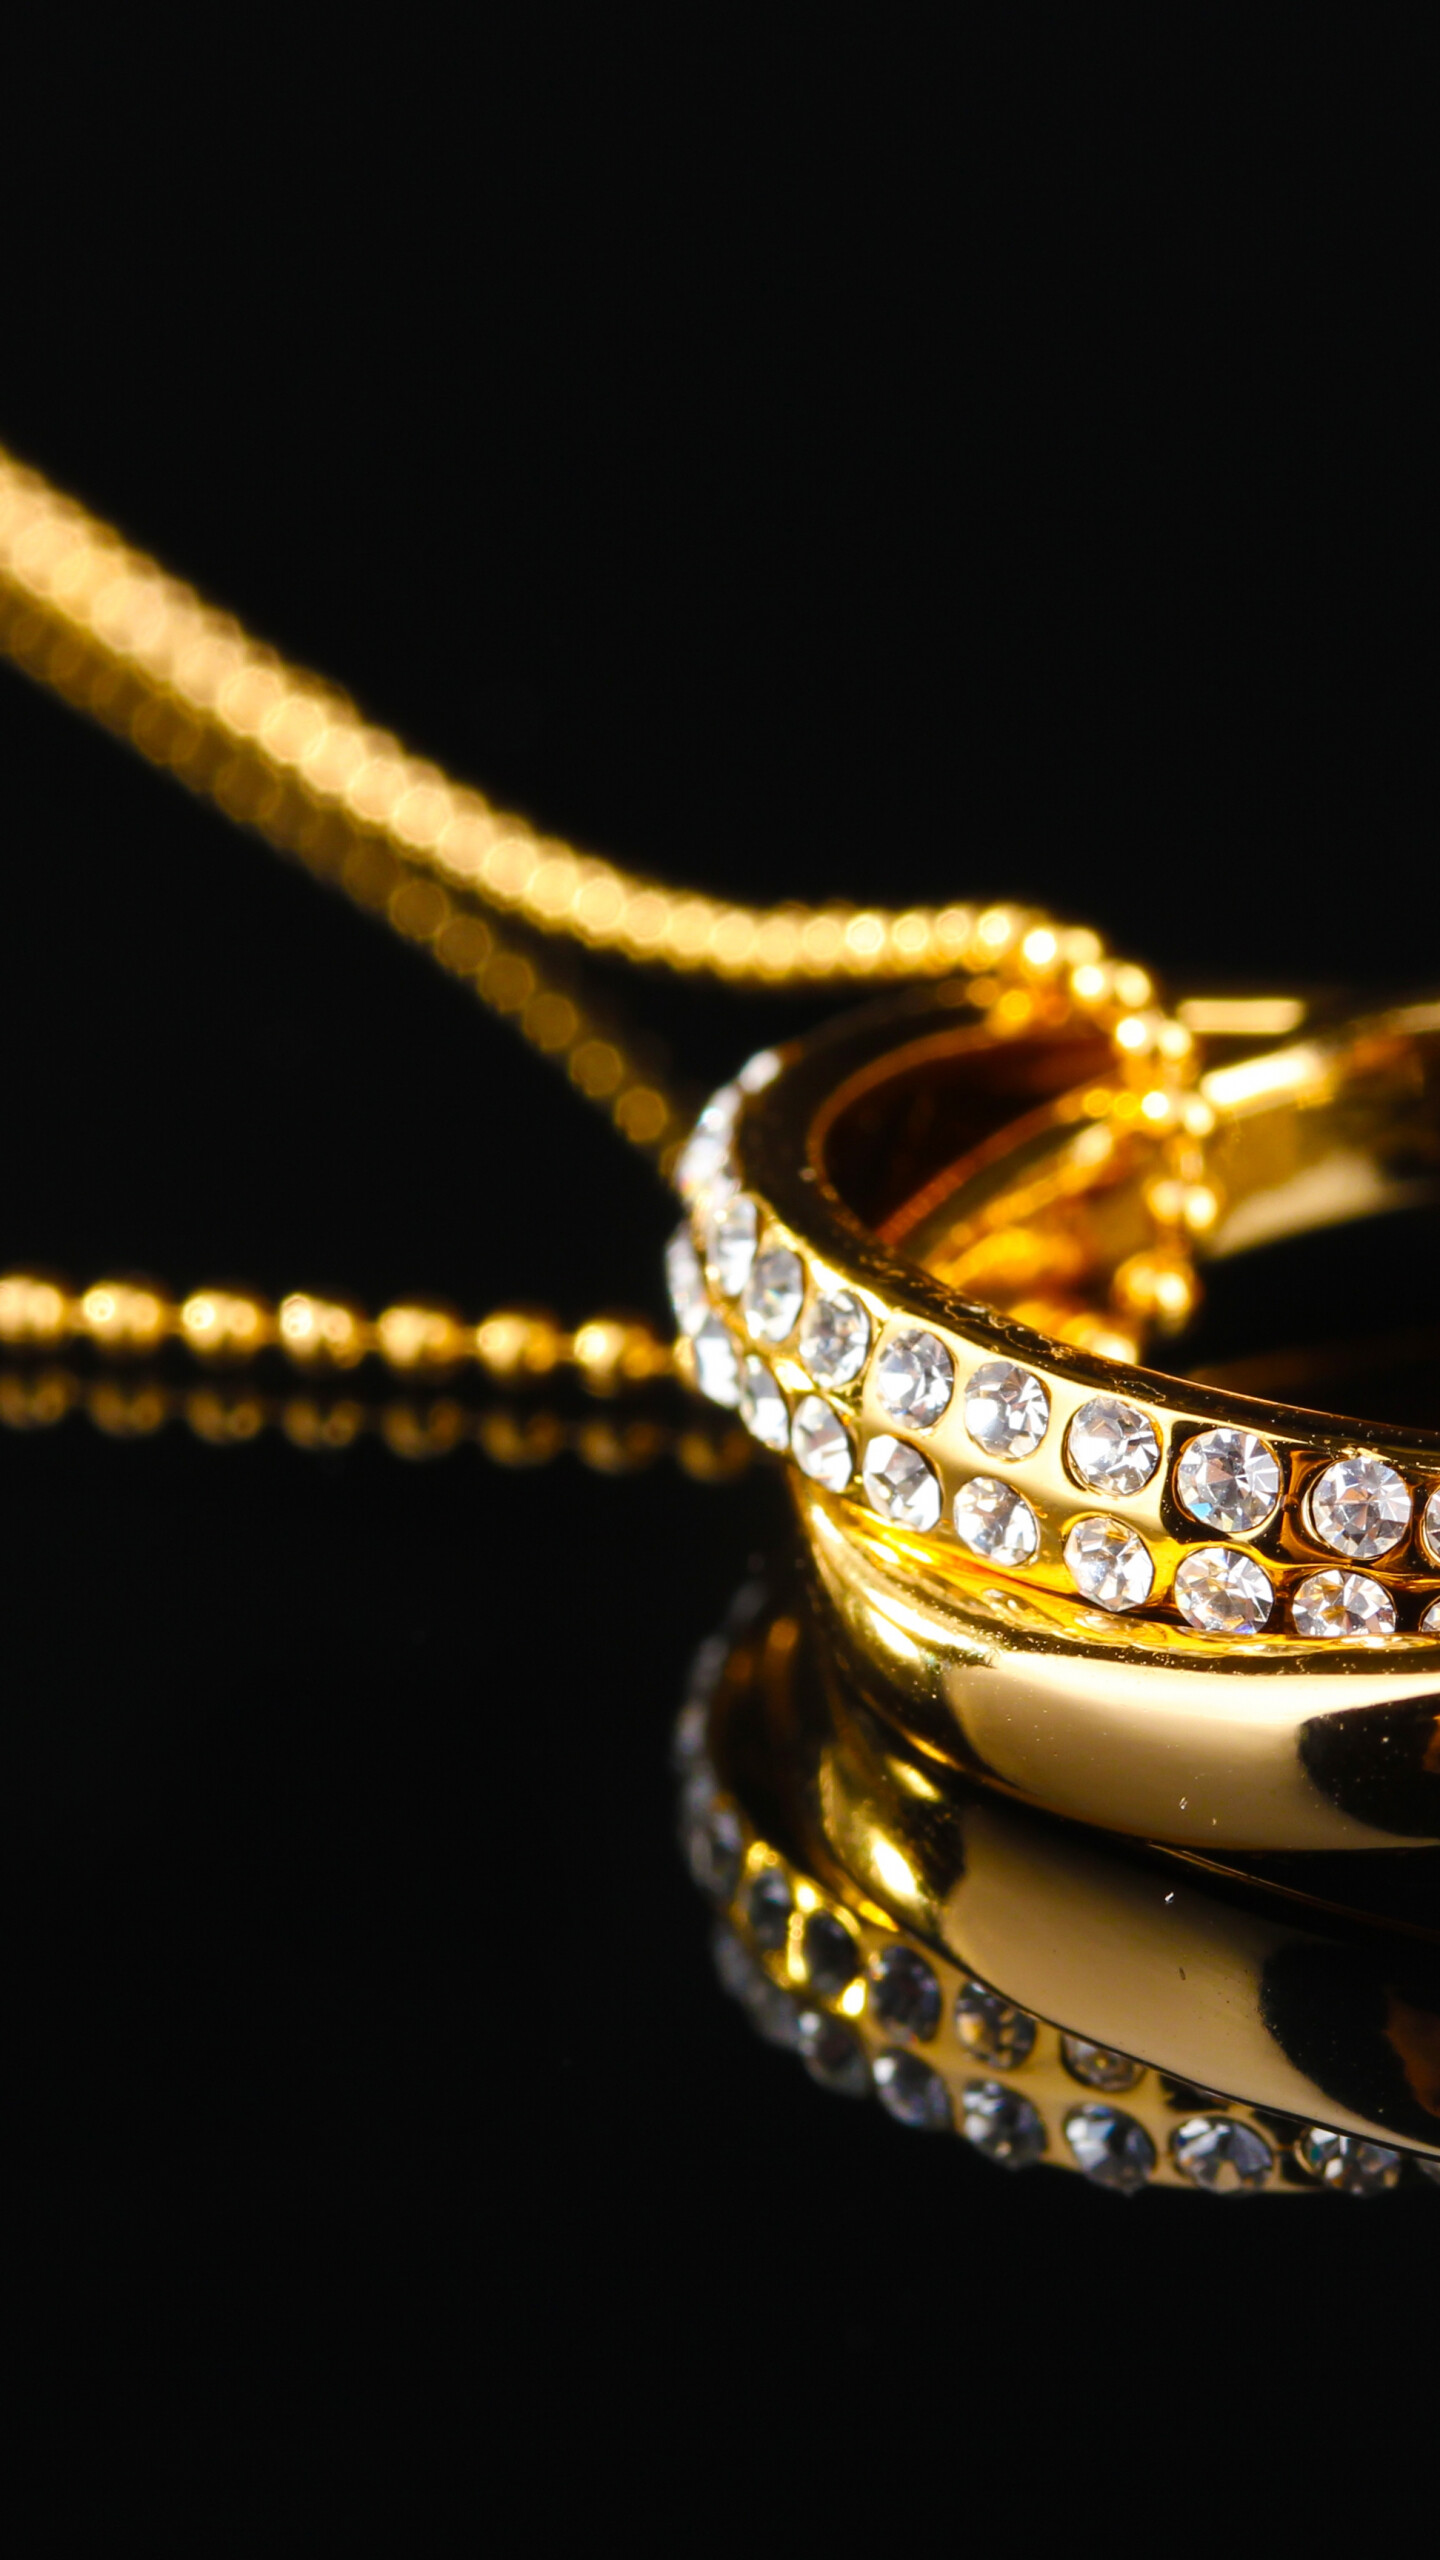 Jewels: An adornment made of precious metal or stones, Necklace. 1440x2560 HD Wallpaper.